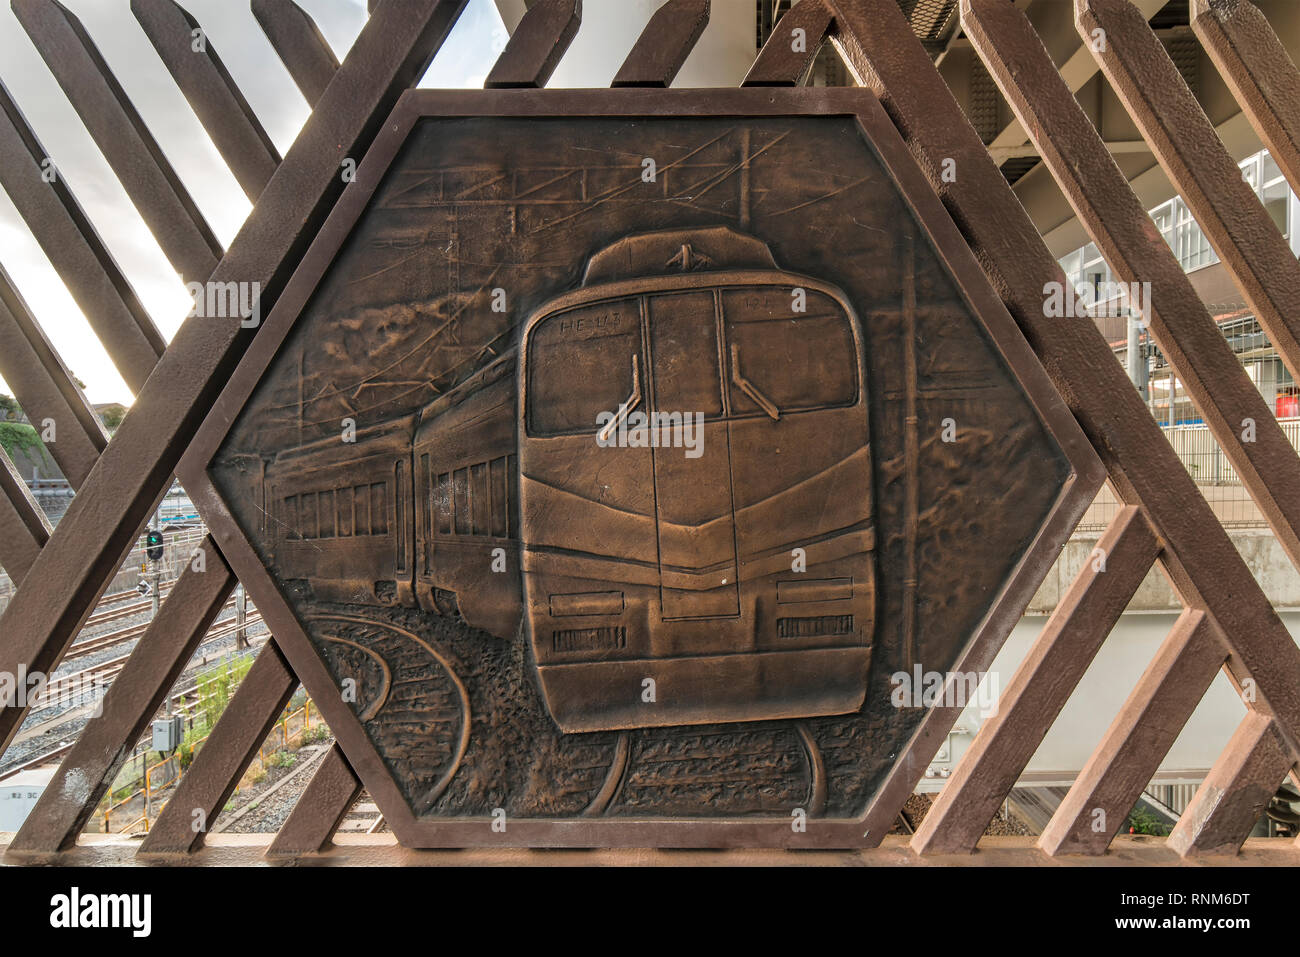 Engraving on metal representing a train on the Shimogoindenbashi Bridge that reaches the Nippori and Yanaka neighborhoods in the Arakawa district at t Stock Photo